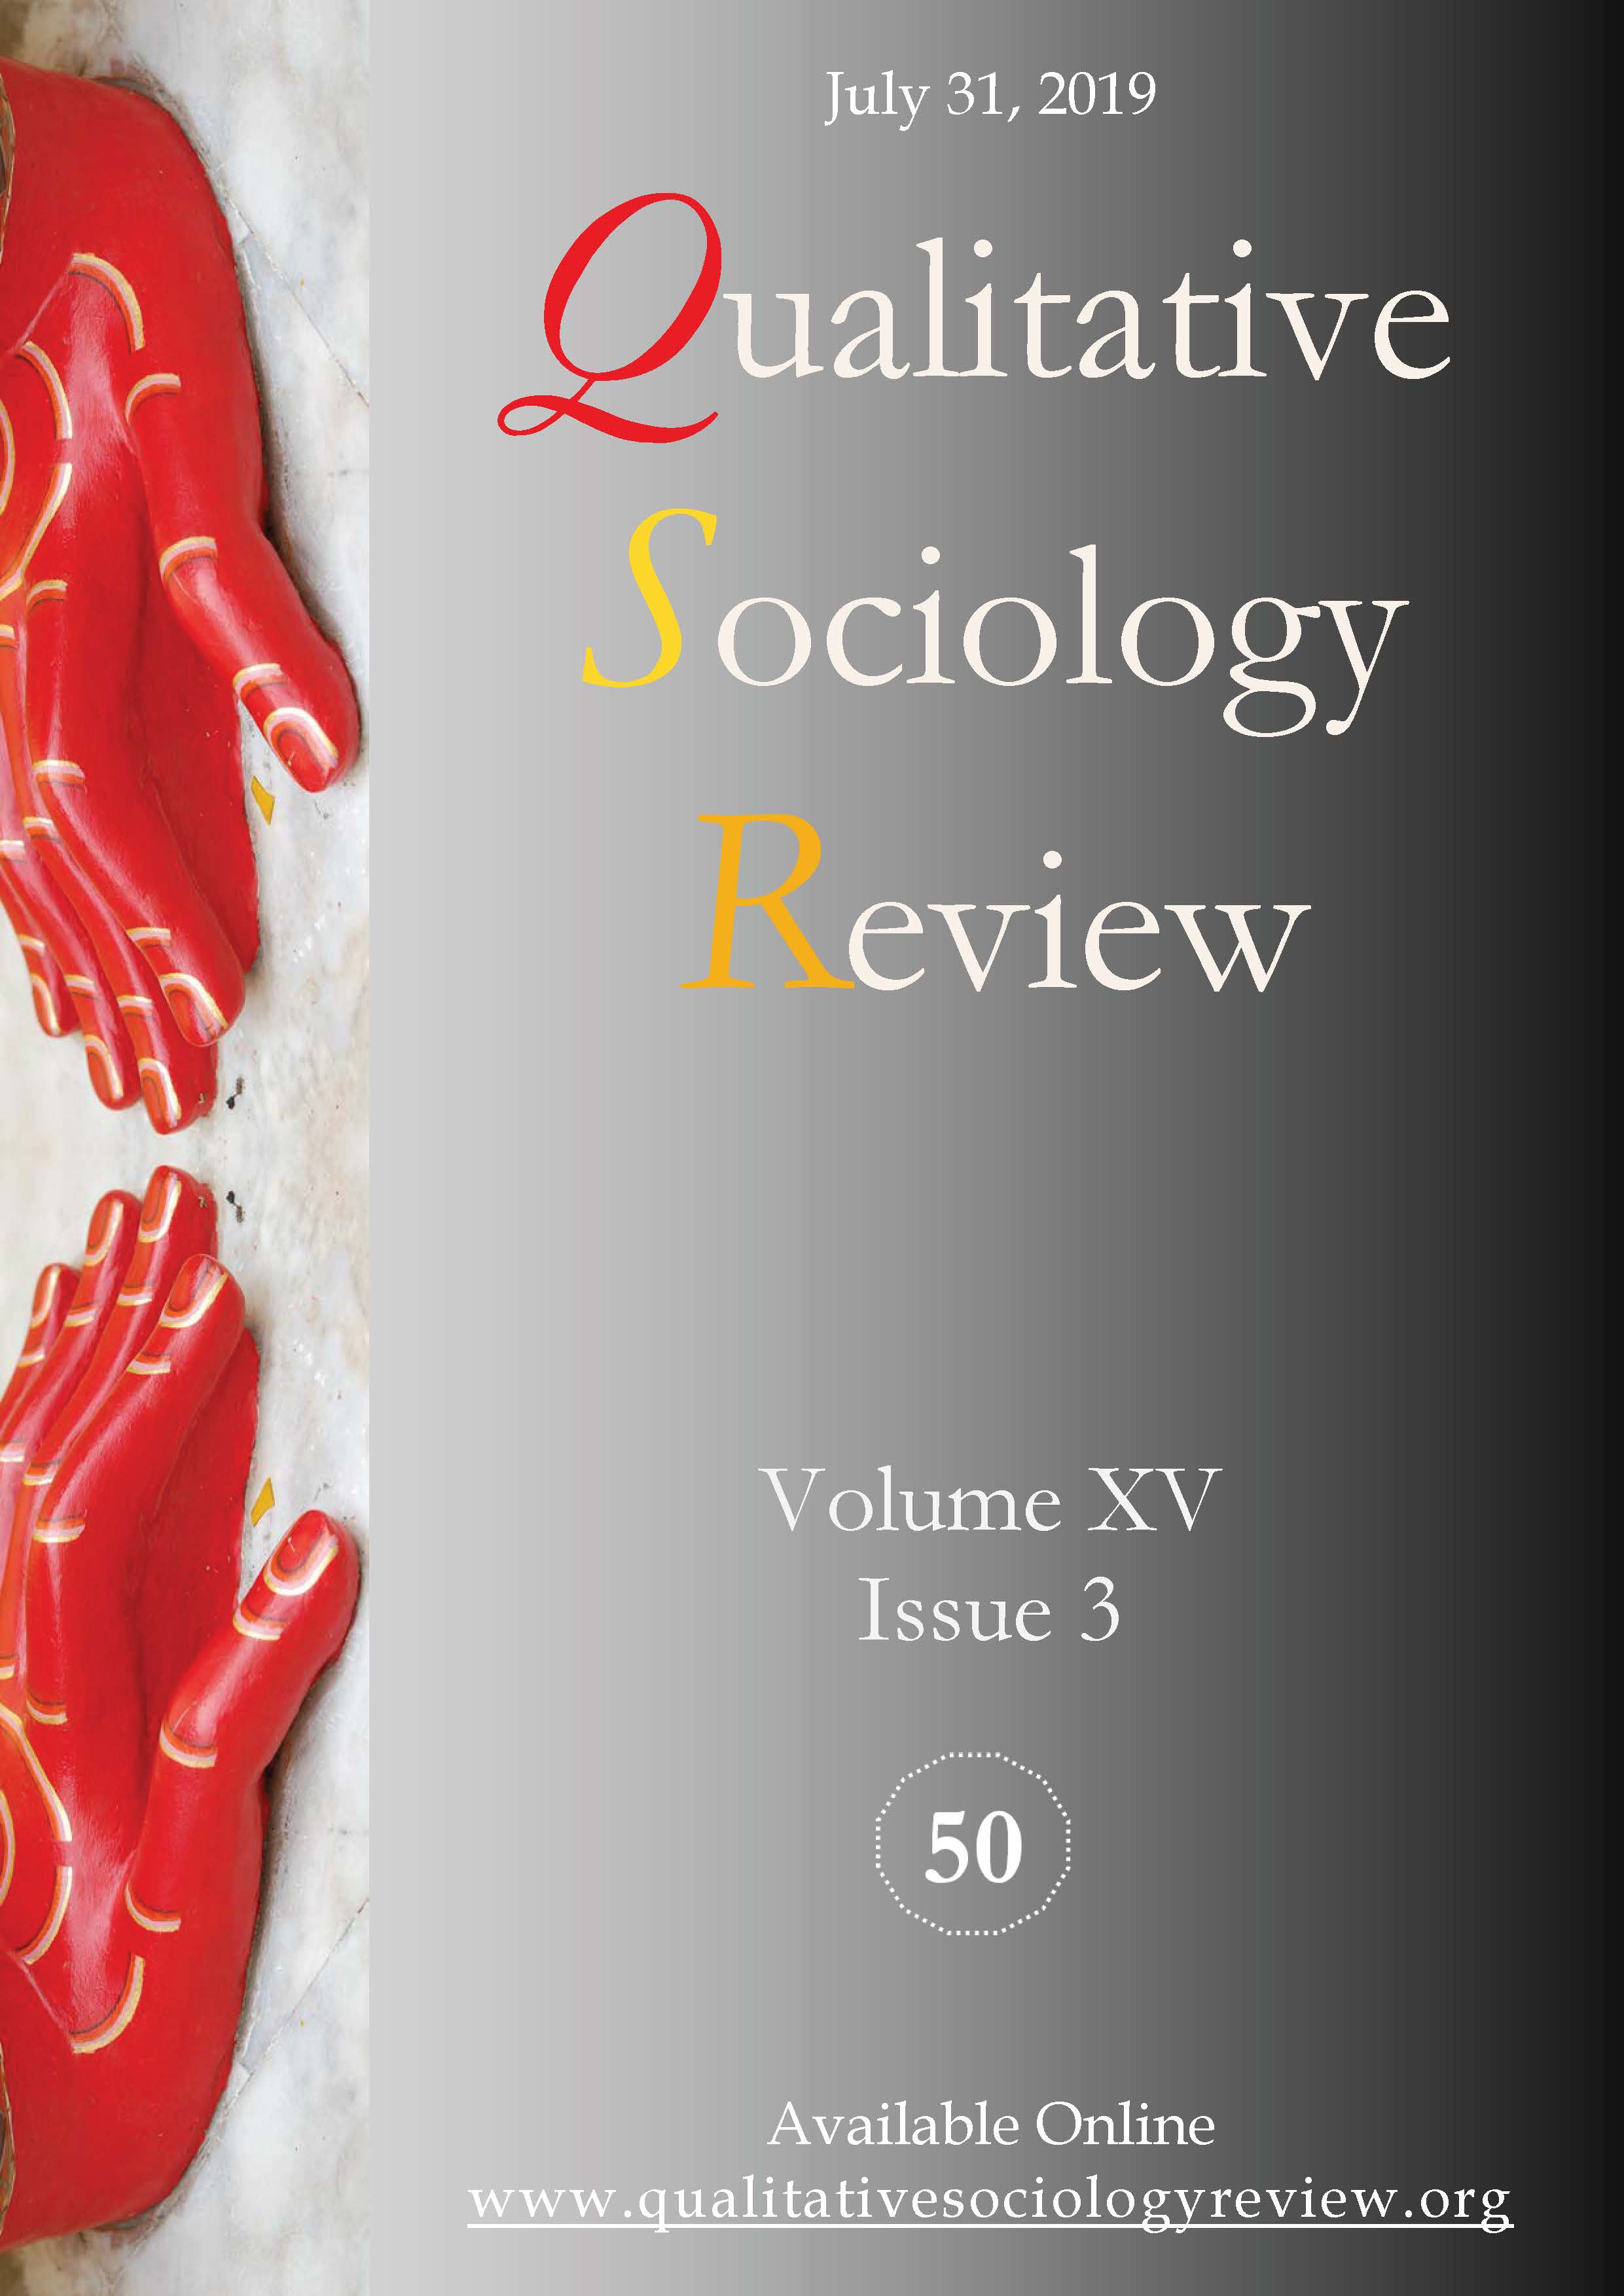 Social Problems and the Contextual Compromise: Subjectivity, Objectivity, and Knowledge in Everyday Life